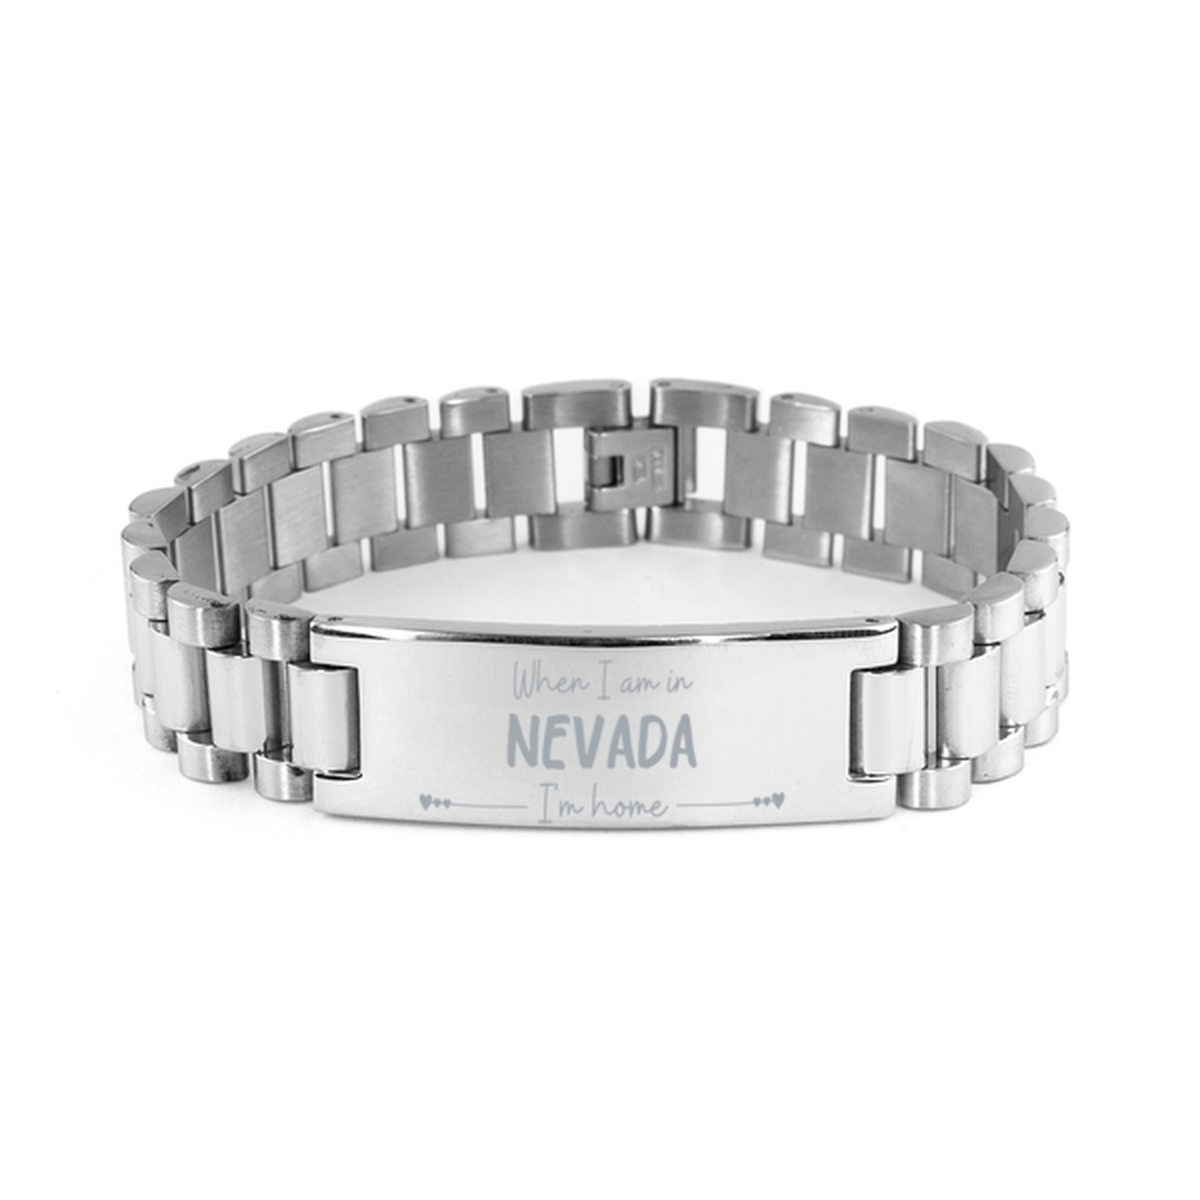 When I am in Nevada I'm home Ladder Stainless Steel Bracelet, Cheap Gifts For Nevada, State Nevada Birthday Gifts for Friends Coworker